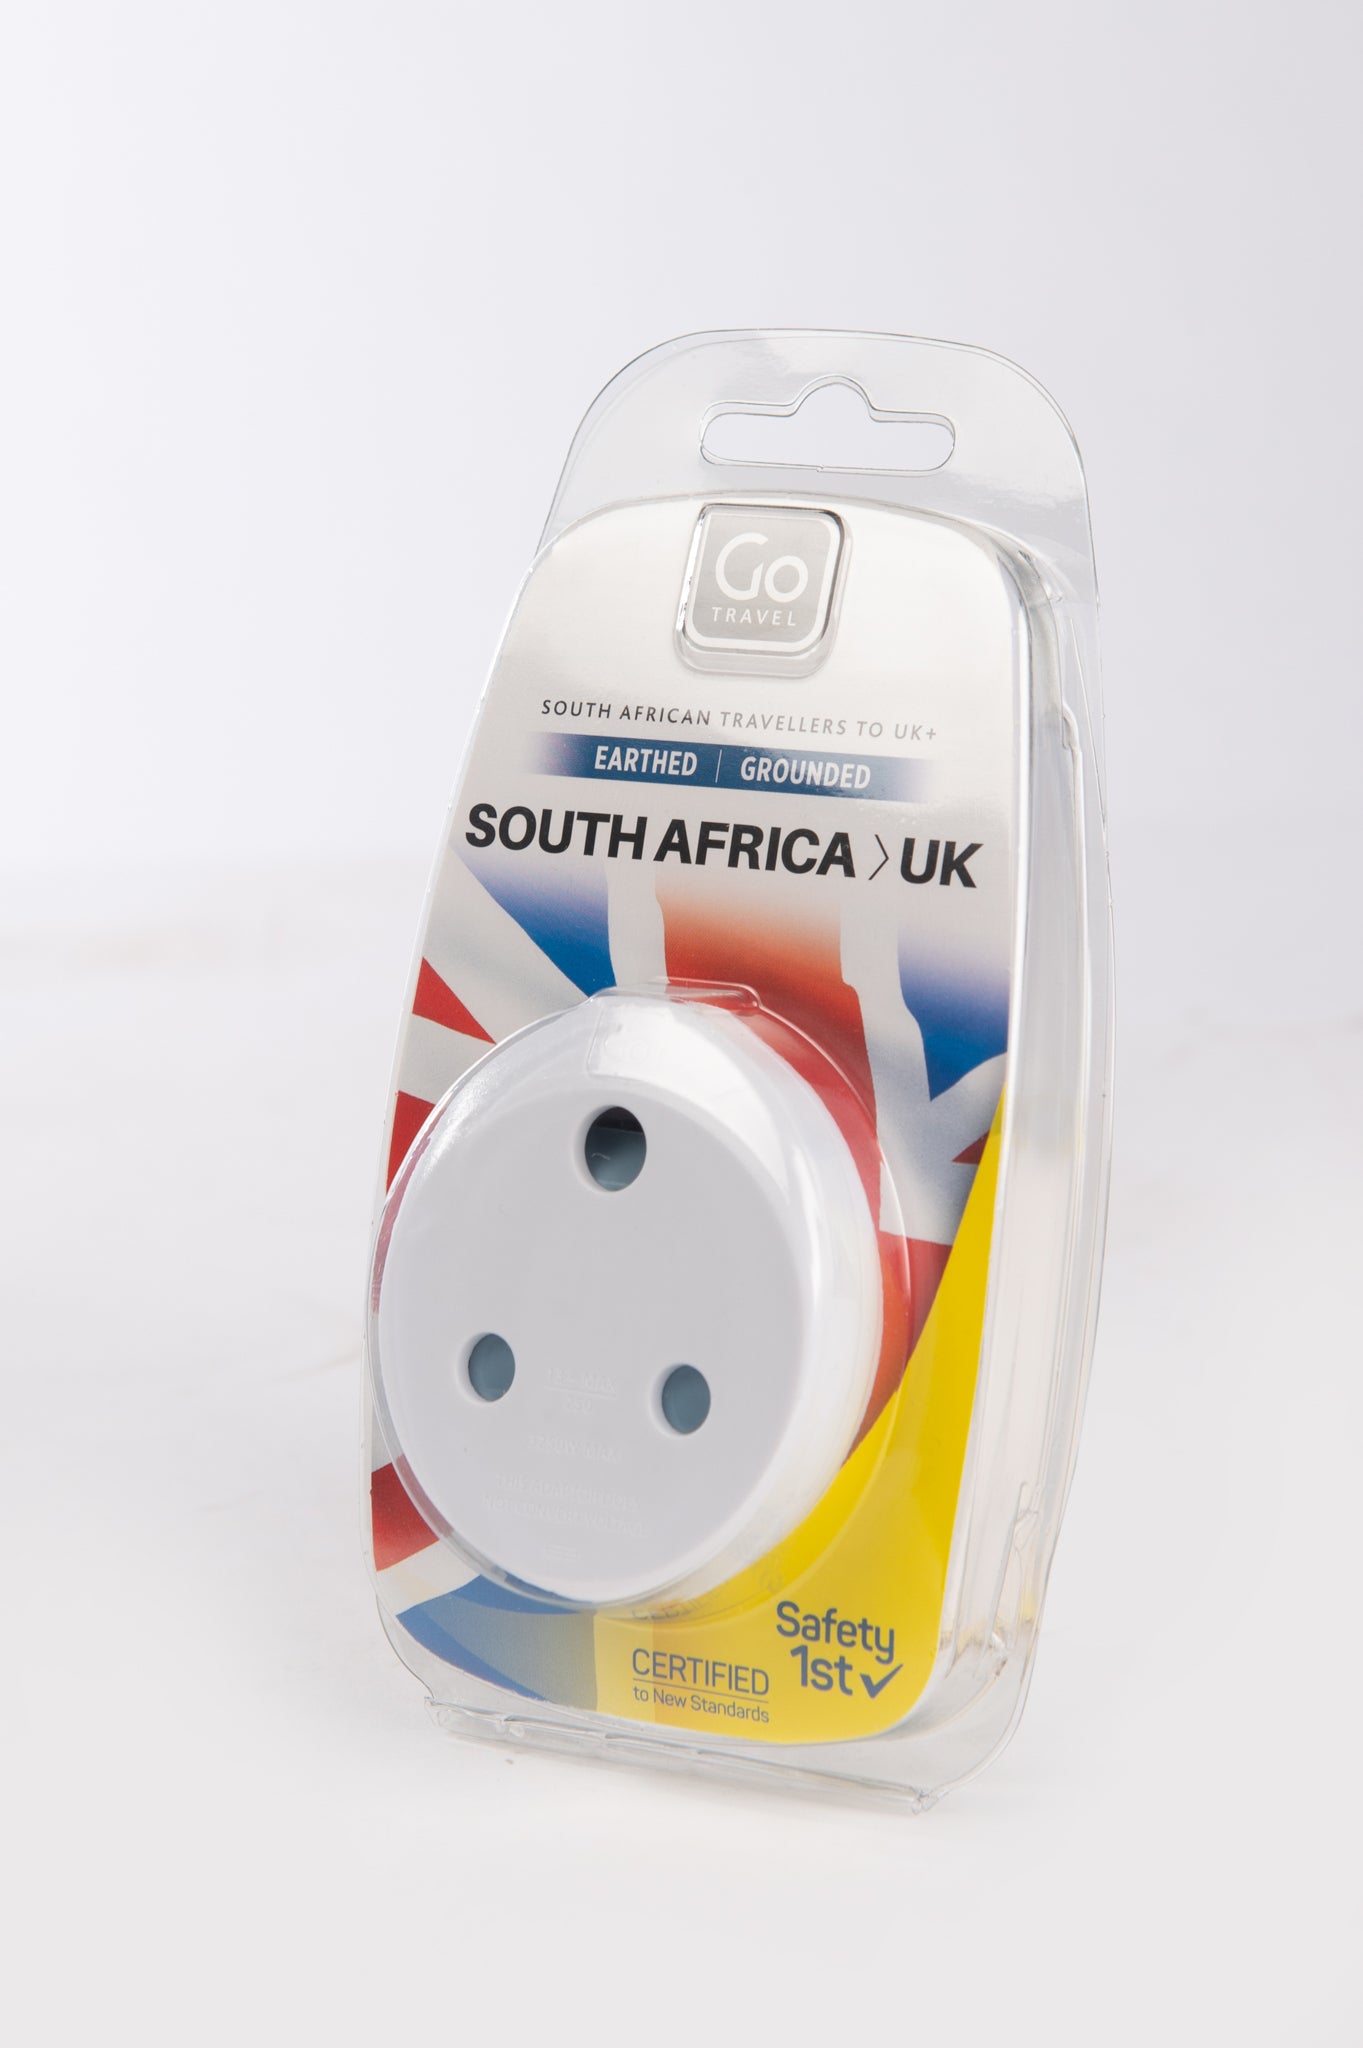 SOUTH AFRICA to UK Adaptor